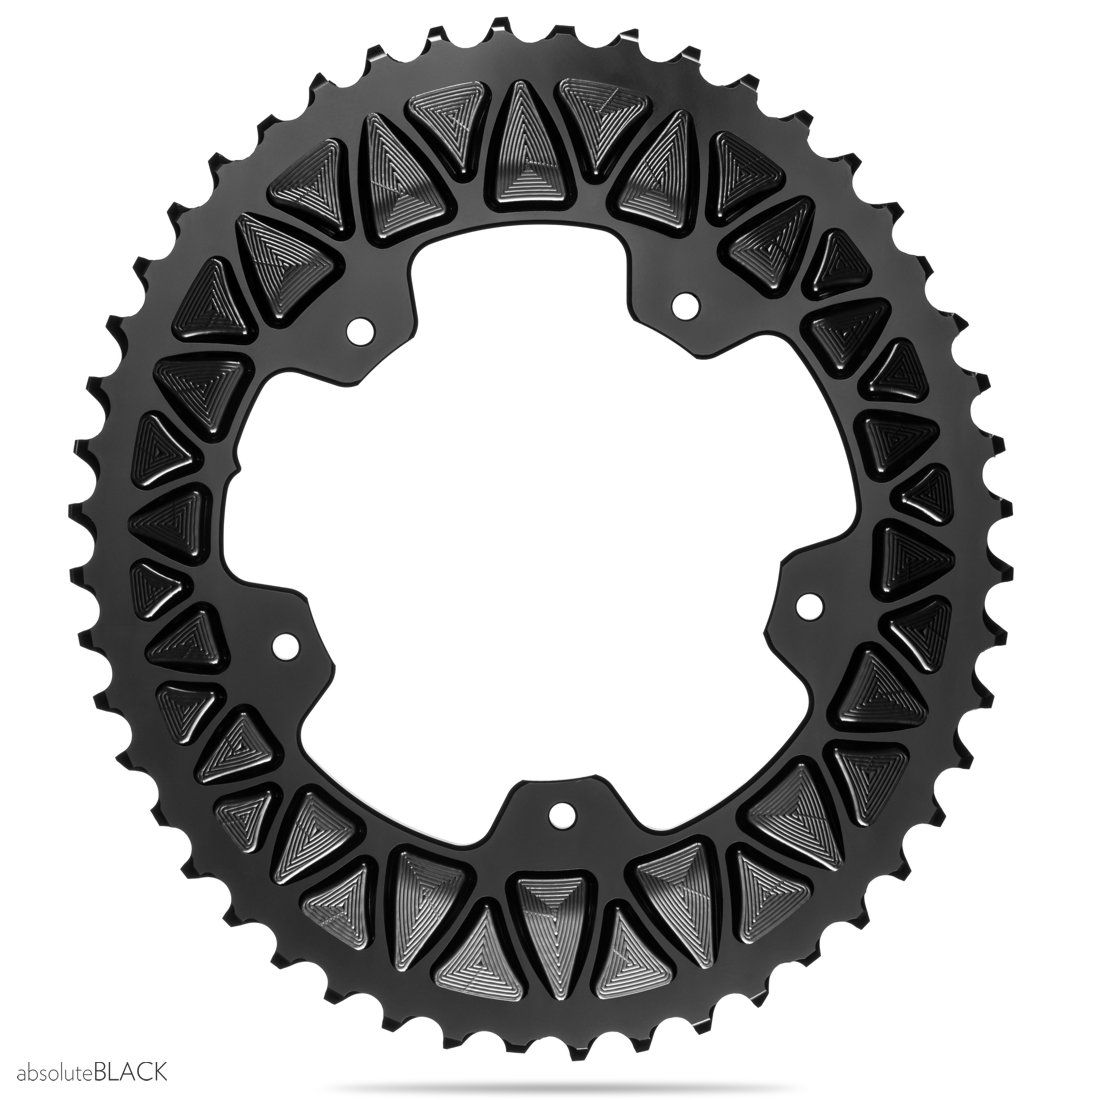 GRAVEL SUB-COMPACT OVAL 110/5, 2X chainrings 48/32T